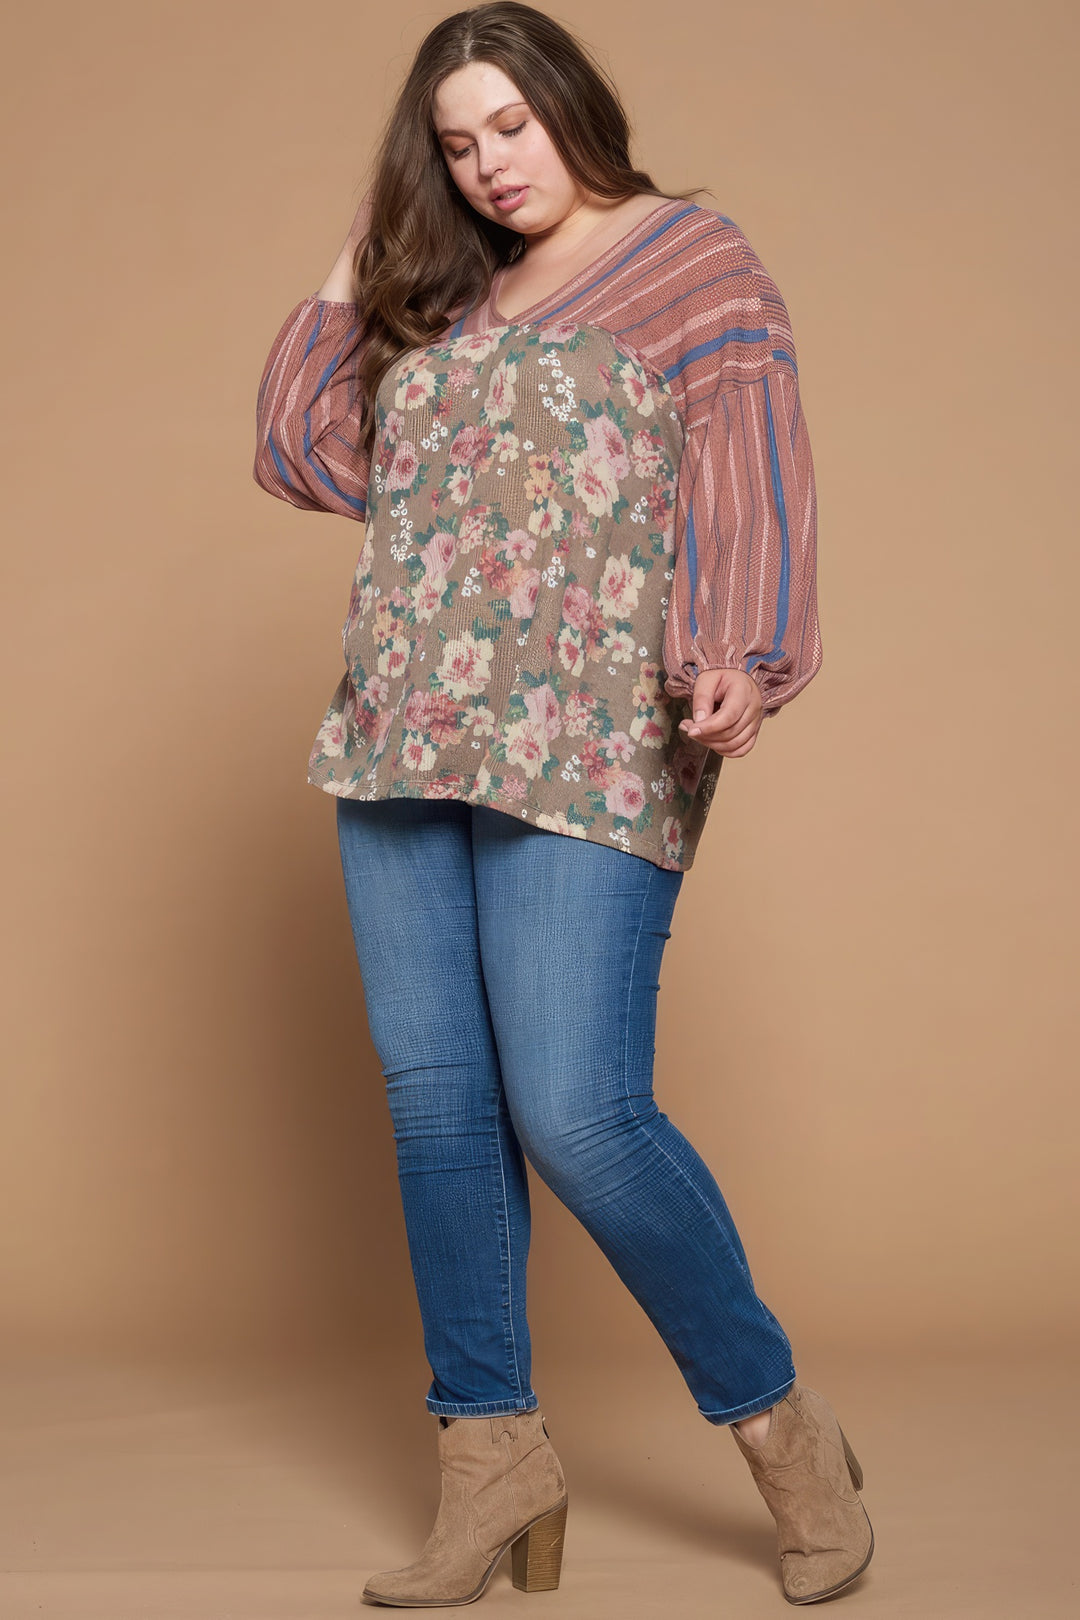 Floral Printed Knit Top with Puffed Sleeves & V-Neck - Luxe Marsala Fabric - Size Options 1XL/2XL & 2XL/3XL